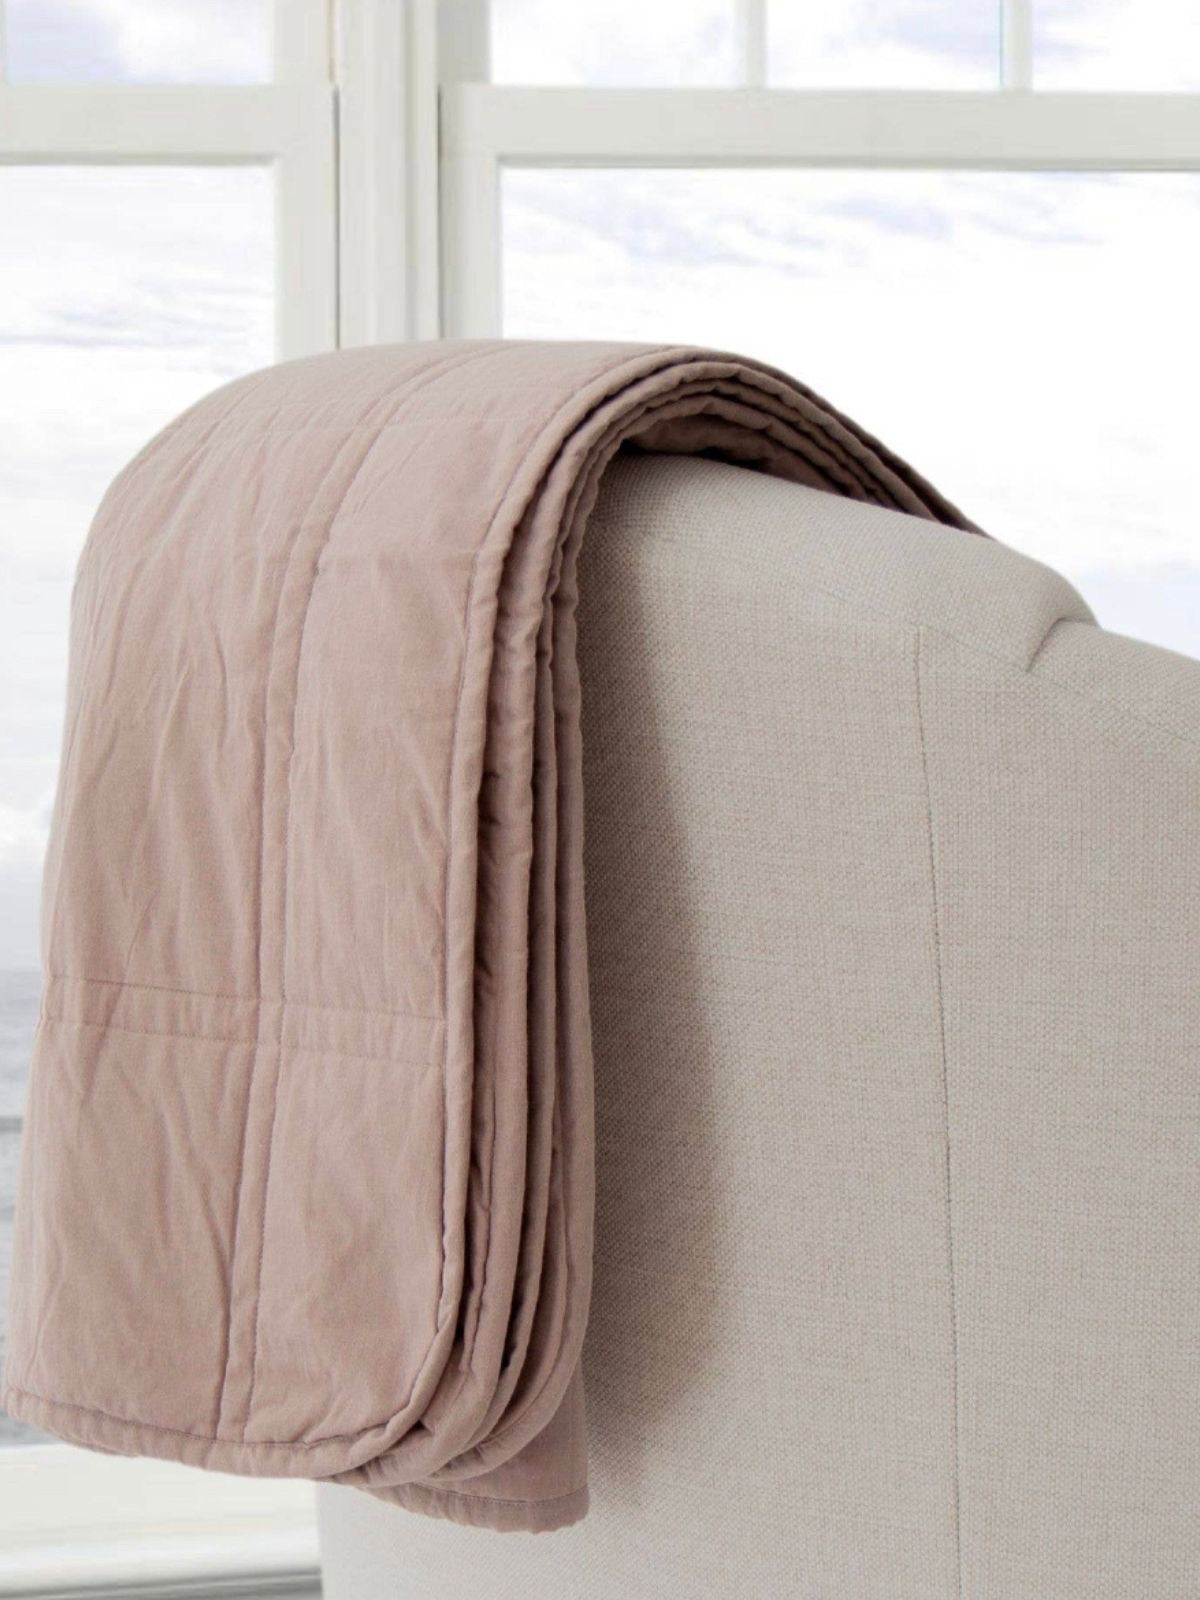 100% Matelasse Cotton Beach House Decorative Throw Blanket in Luxurious Oyster Color, 50W x 60L.